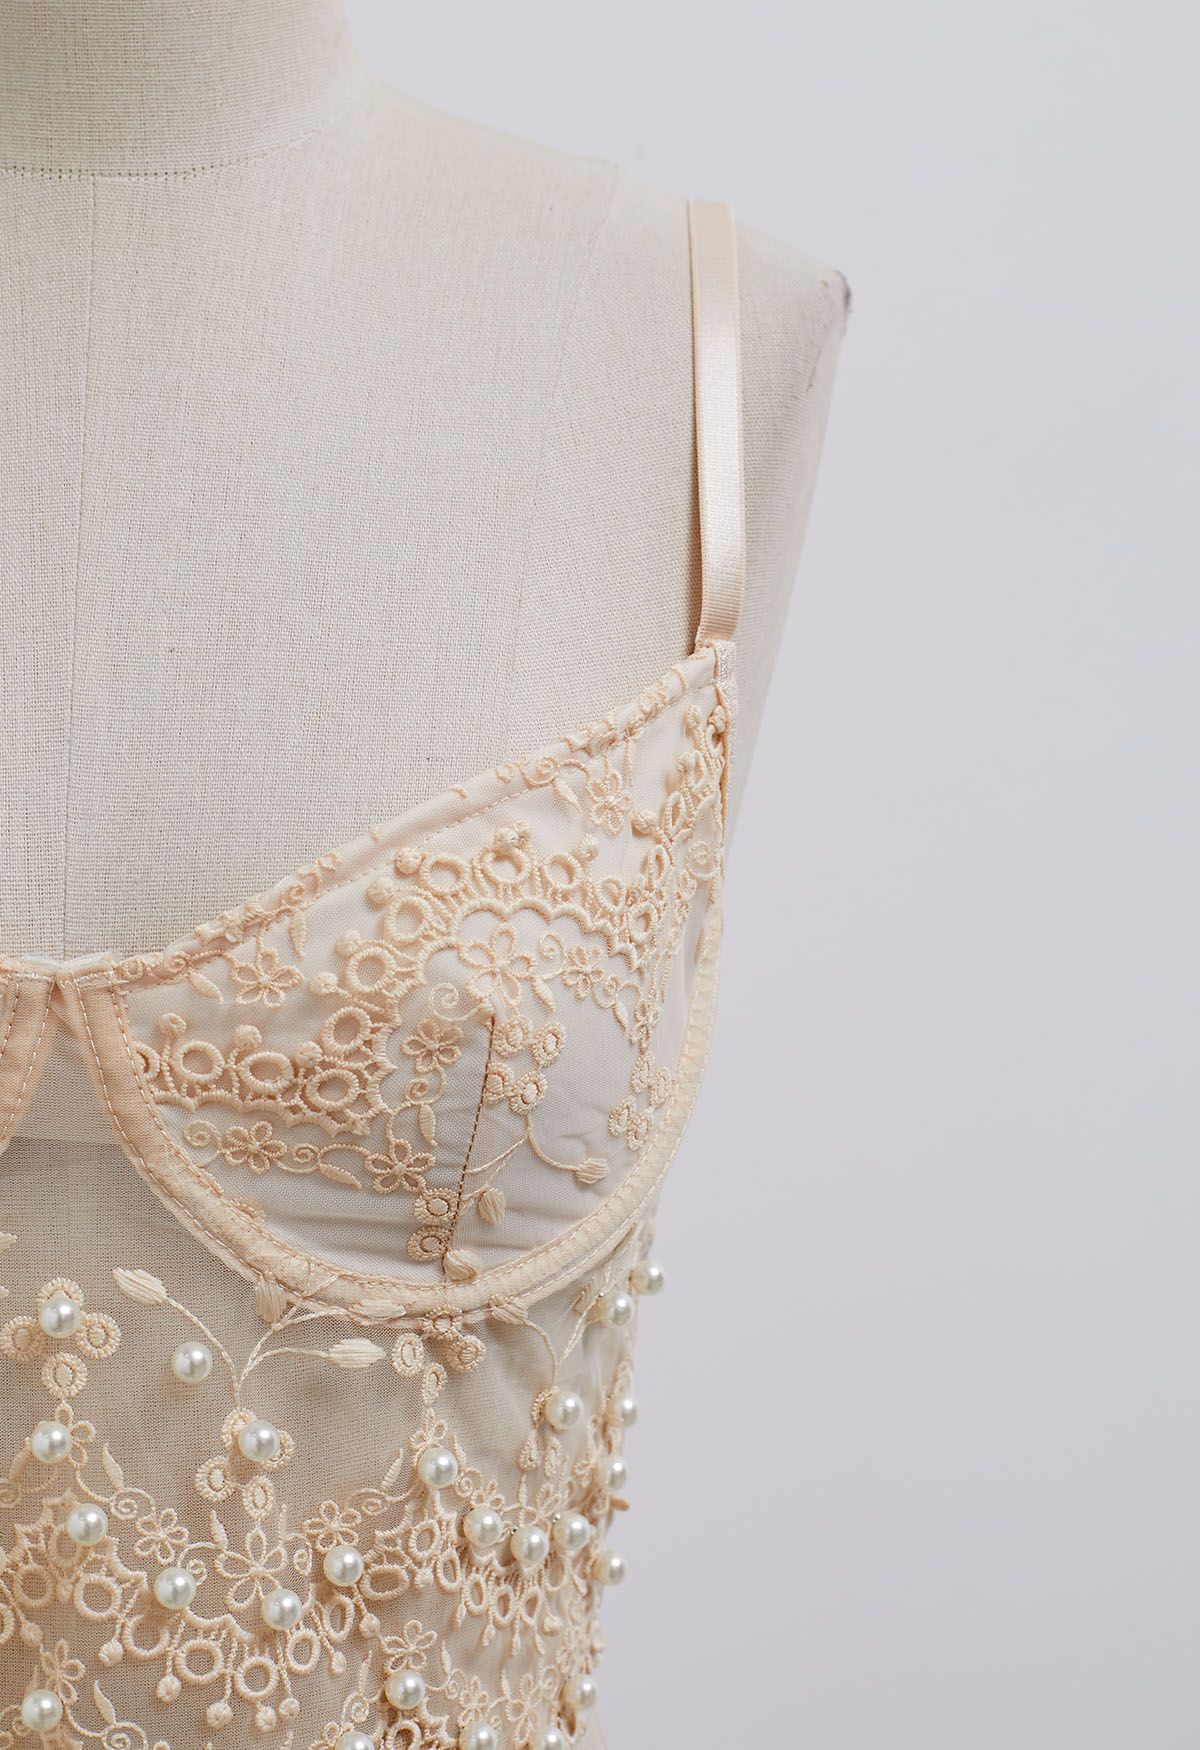 Pearl Floret Embroidered Mesh Bustier Top